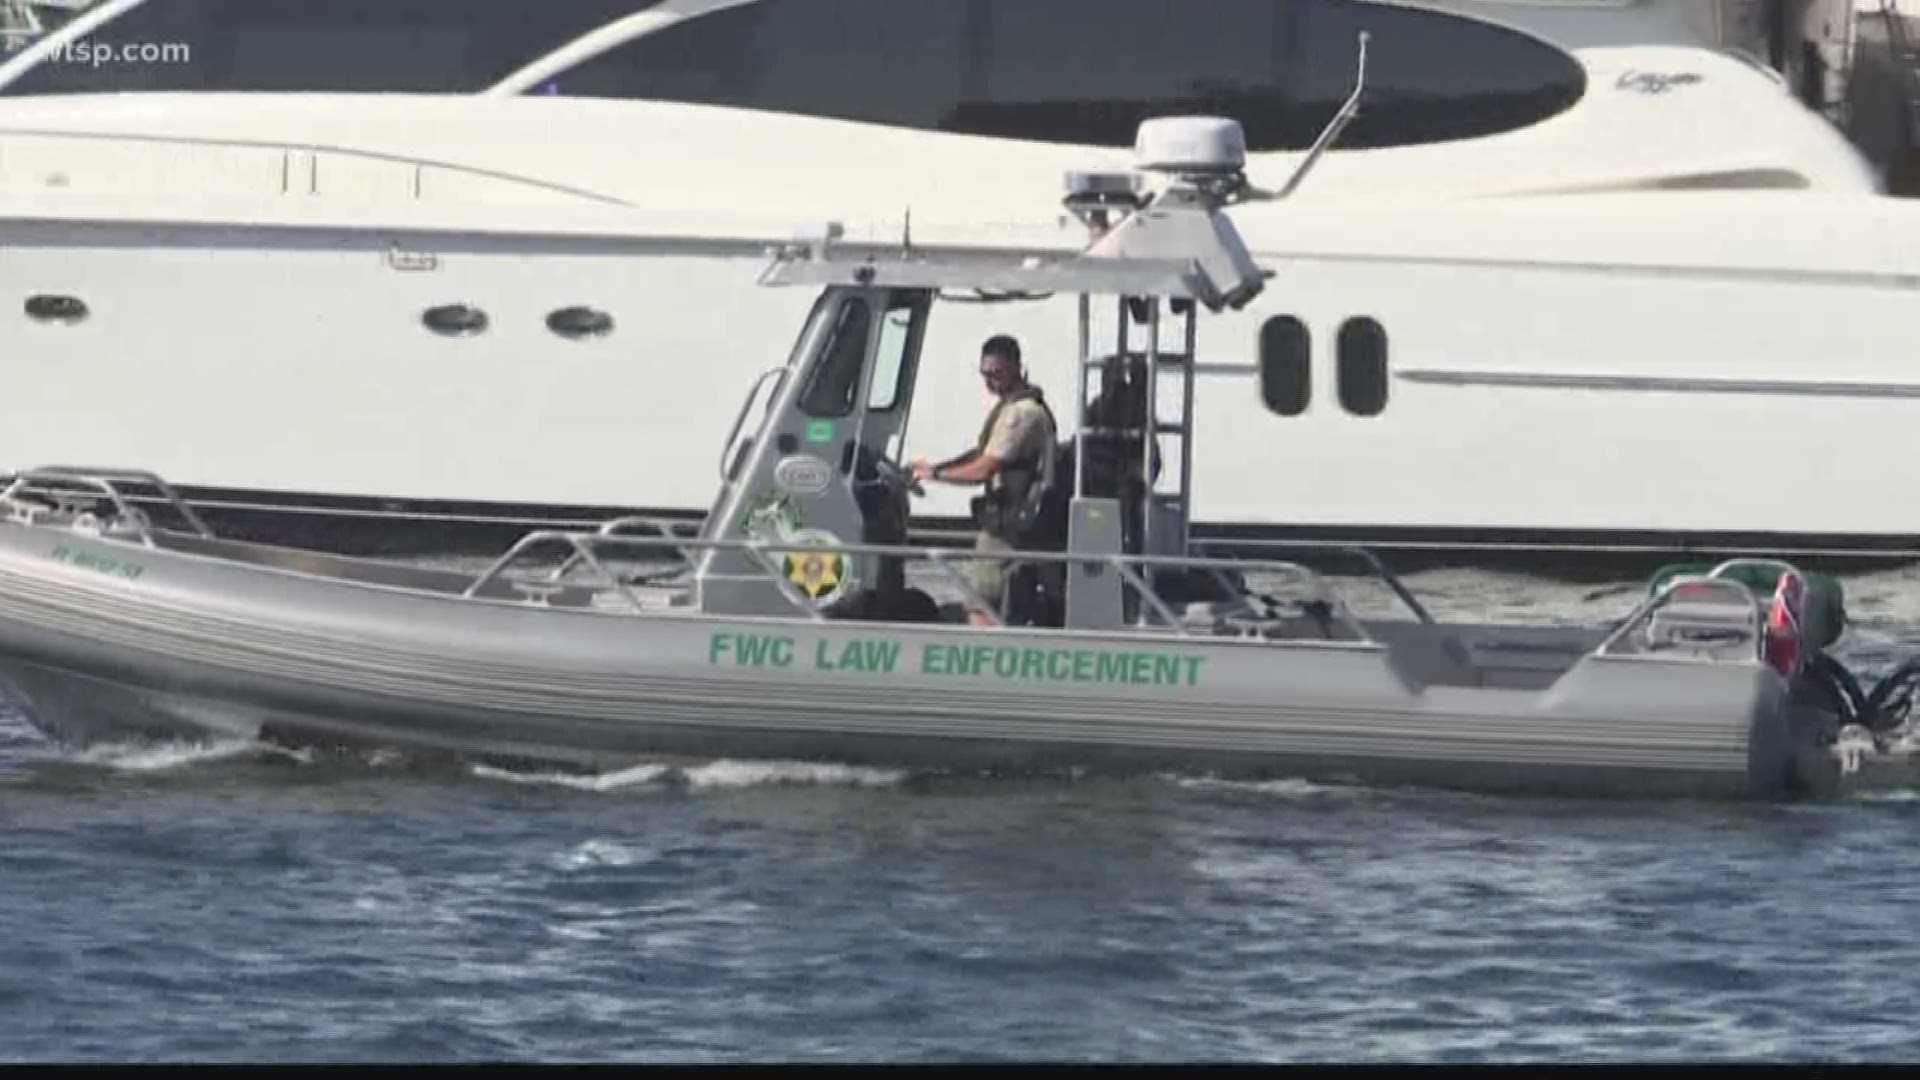 Memorial Day weekend is the unofficial start of summer, and Floridians are taking full advantage of that by enjoying the water that surrounds the Sunshine State.

More boats on the water mean more Florida Fish and Wildlife Conservation Commission officers patrolling, looking for anyone operating under the influence of alcohol or drugs.